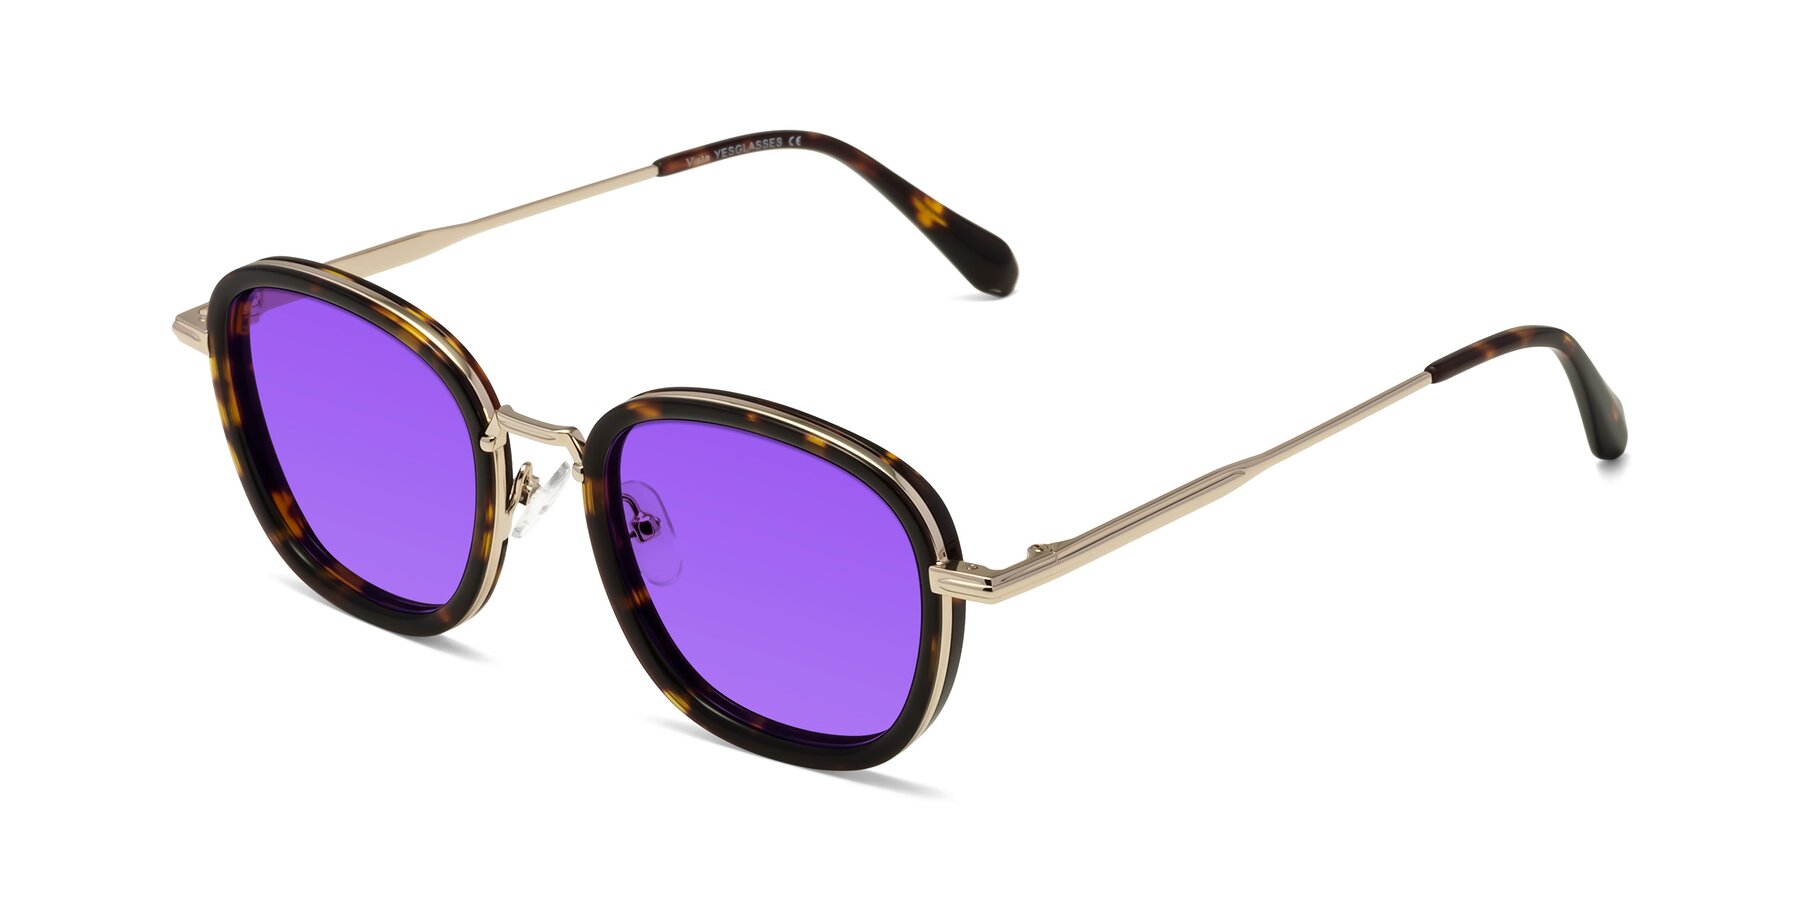 Angle of Vista in Tortoise-Light Gold with Purple Tinted Lenses